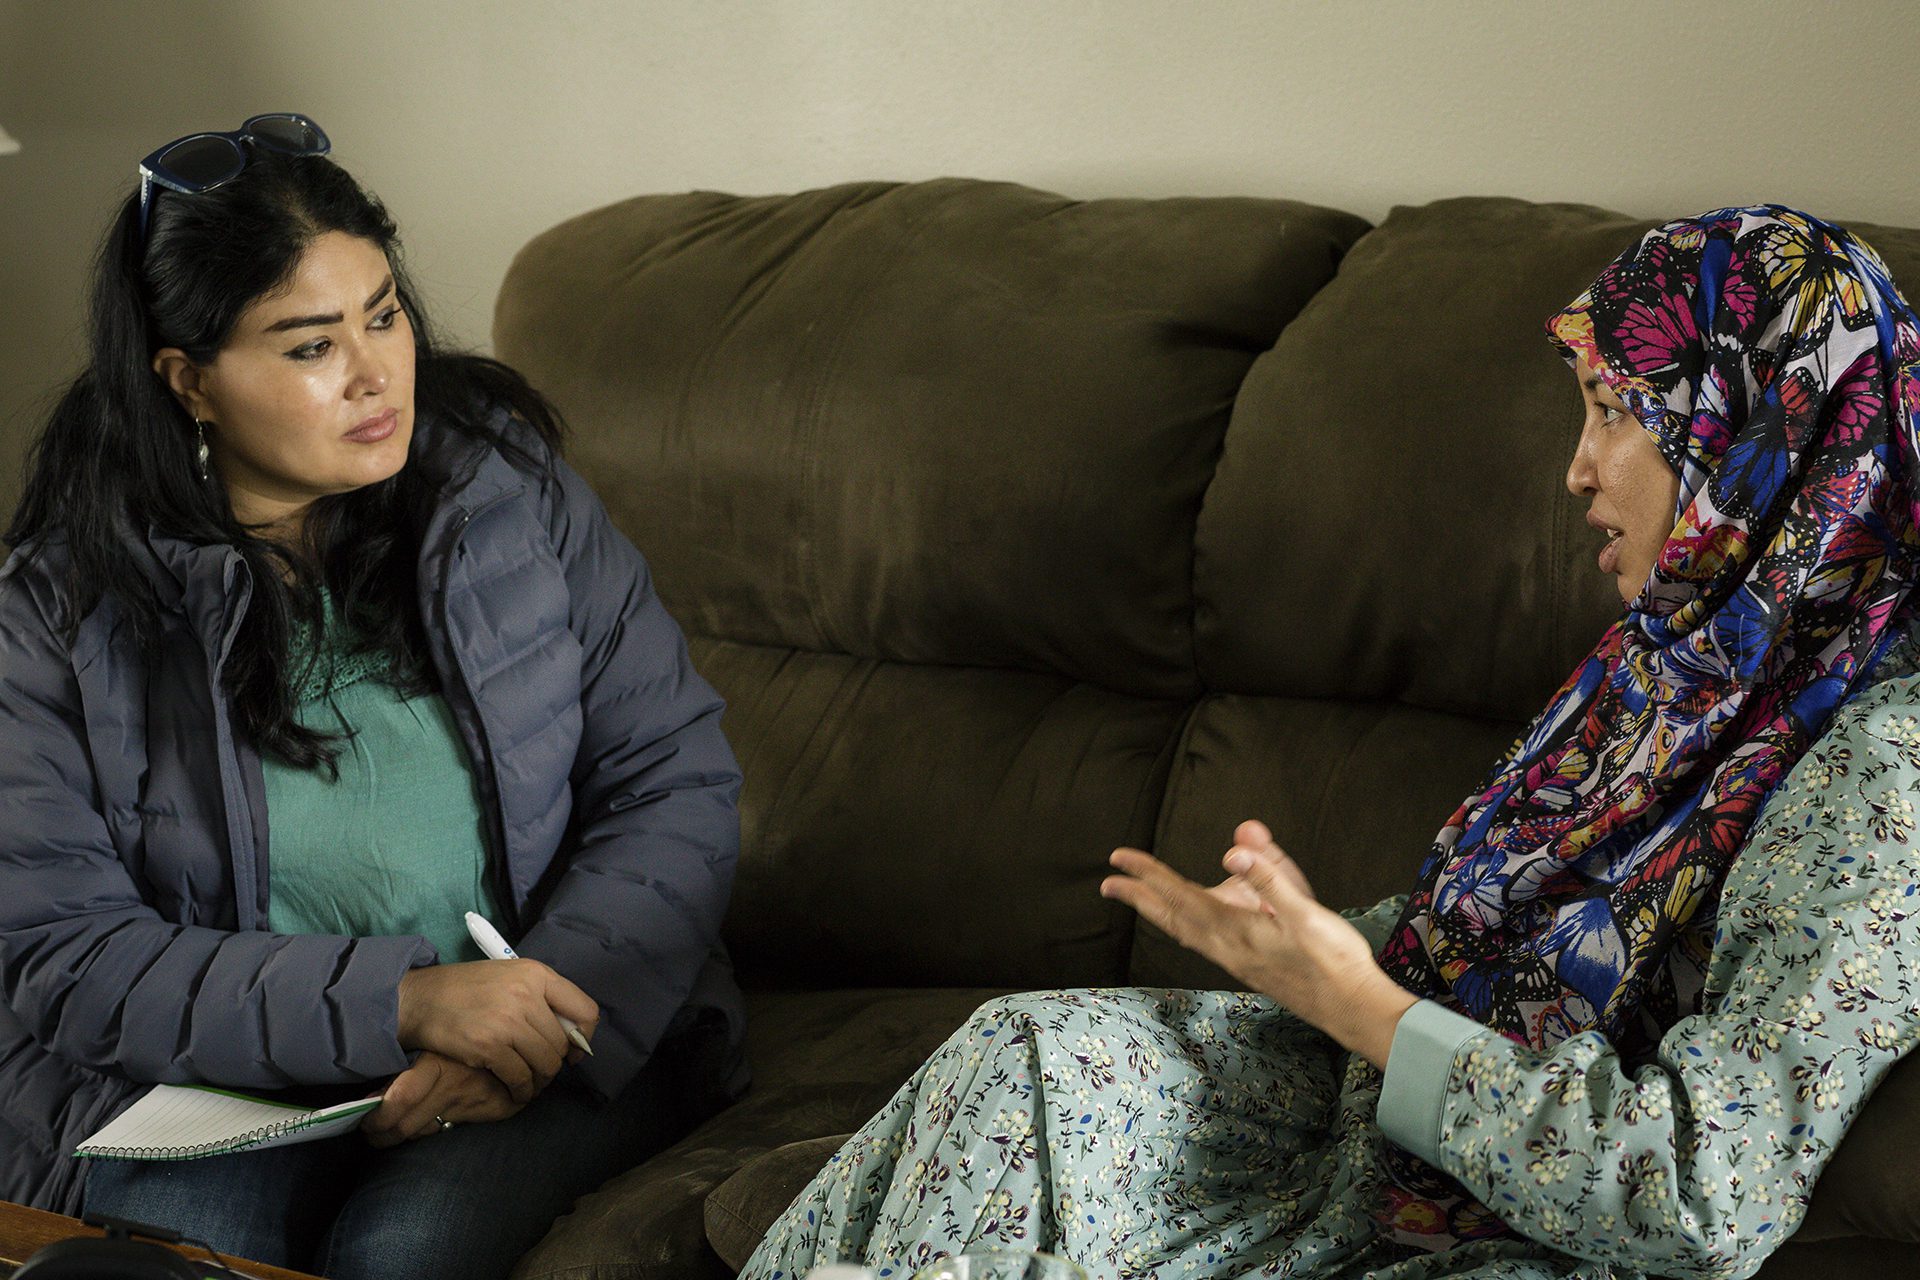 Saleha Soadat interviews former Afghan district governor Salima Mazari on a couch in her current home